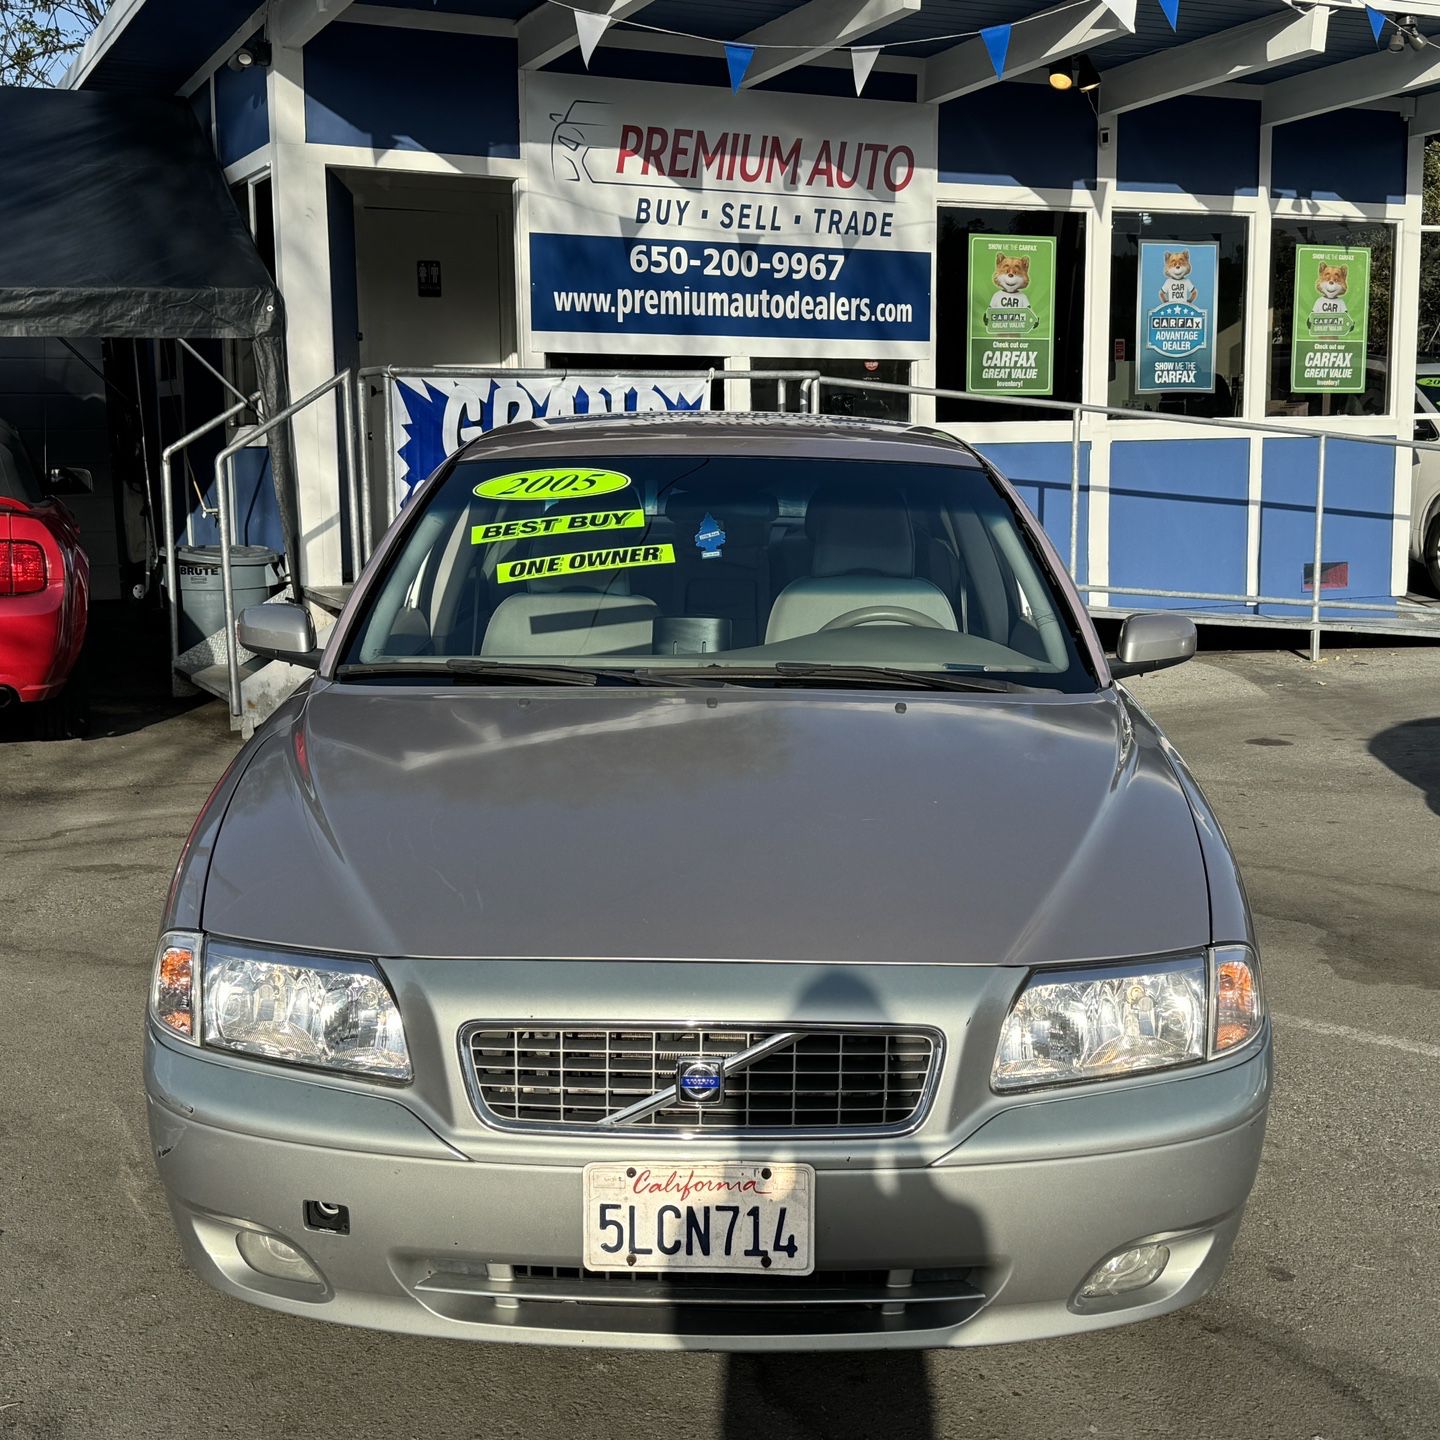 2005 Volvo S80. Clean Title, Pass Smog, Runs Great!